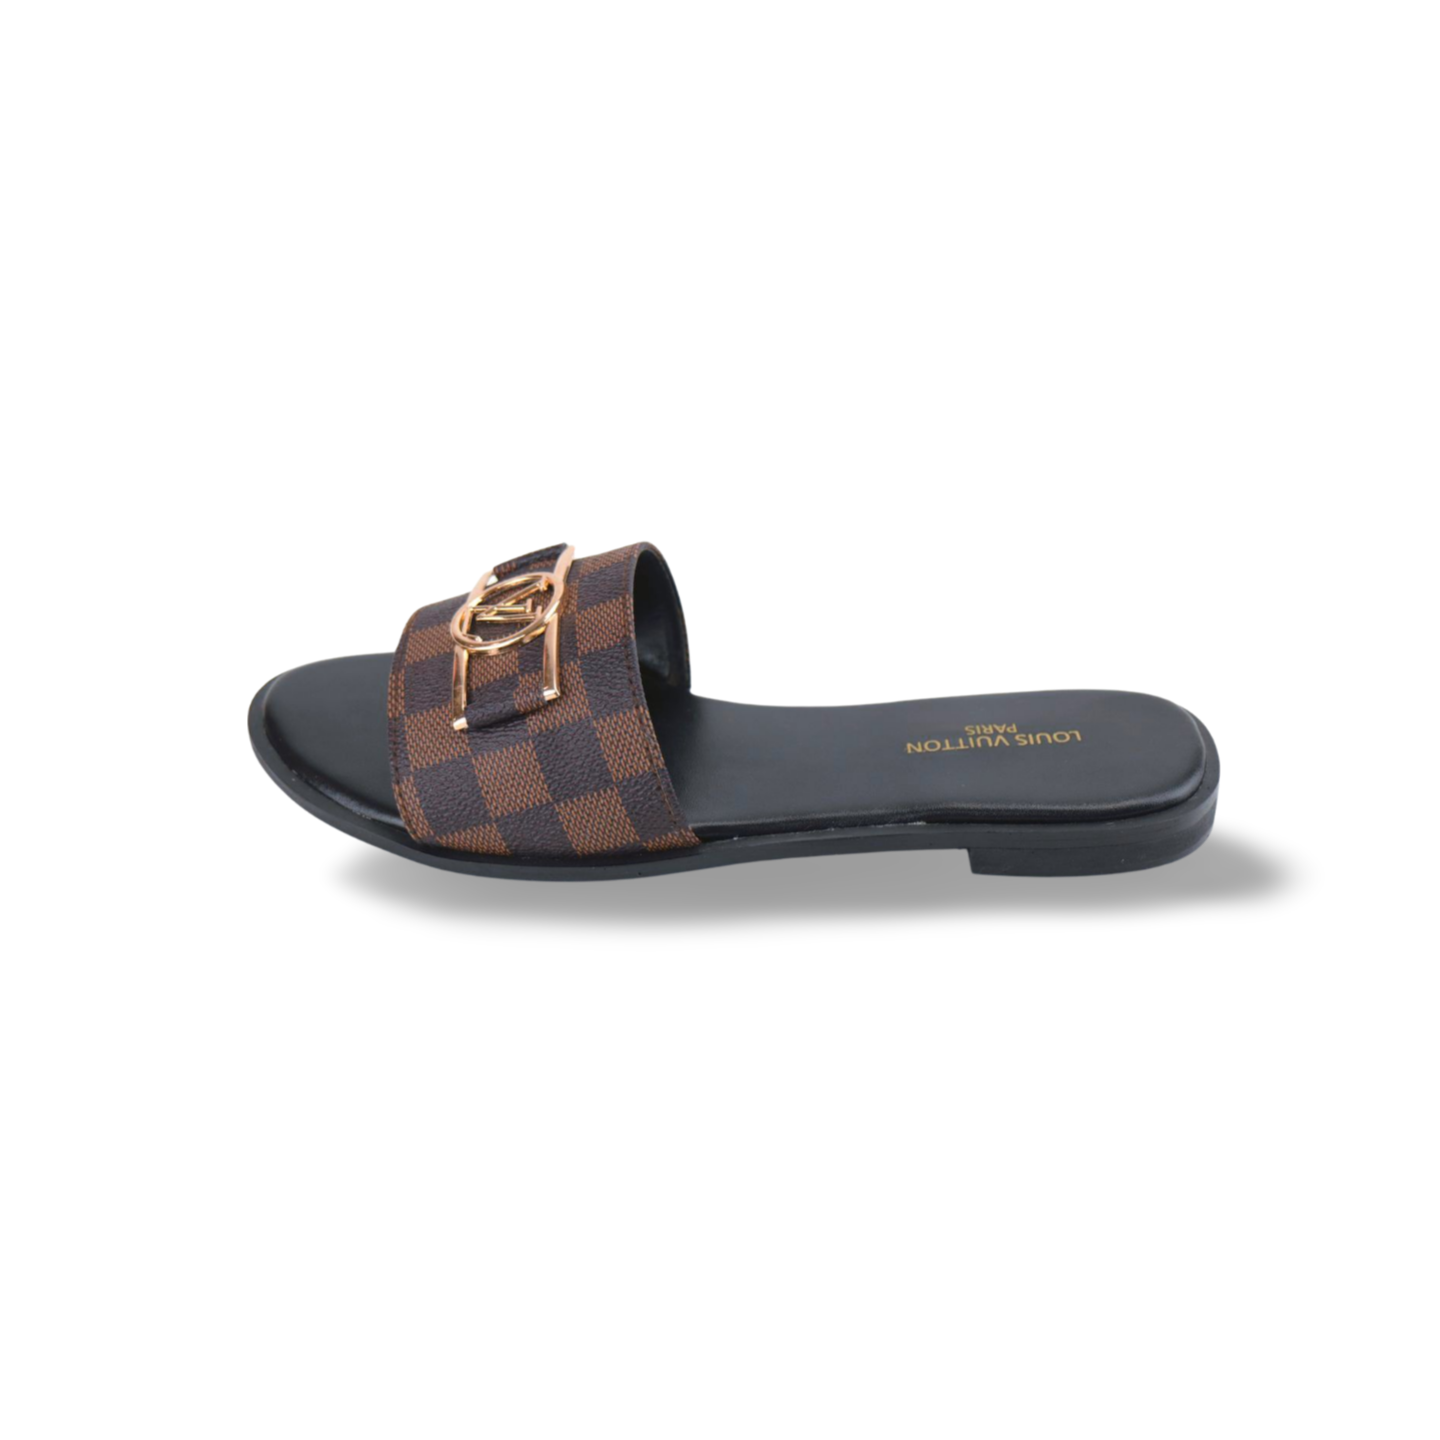 Luxury Ou Leather Flat Slides For Women